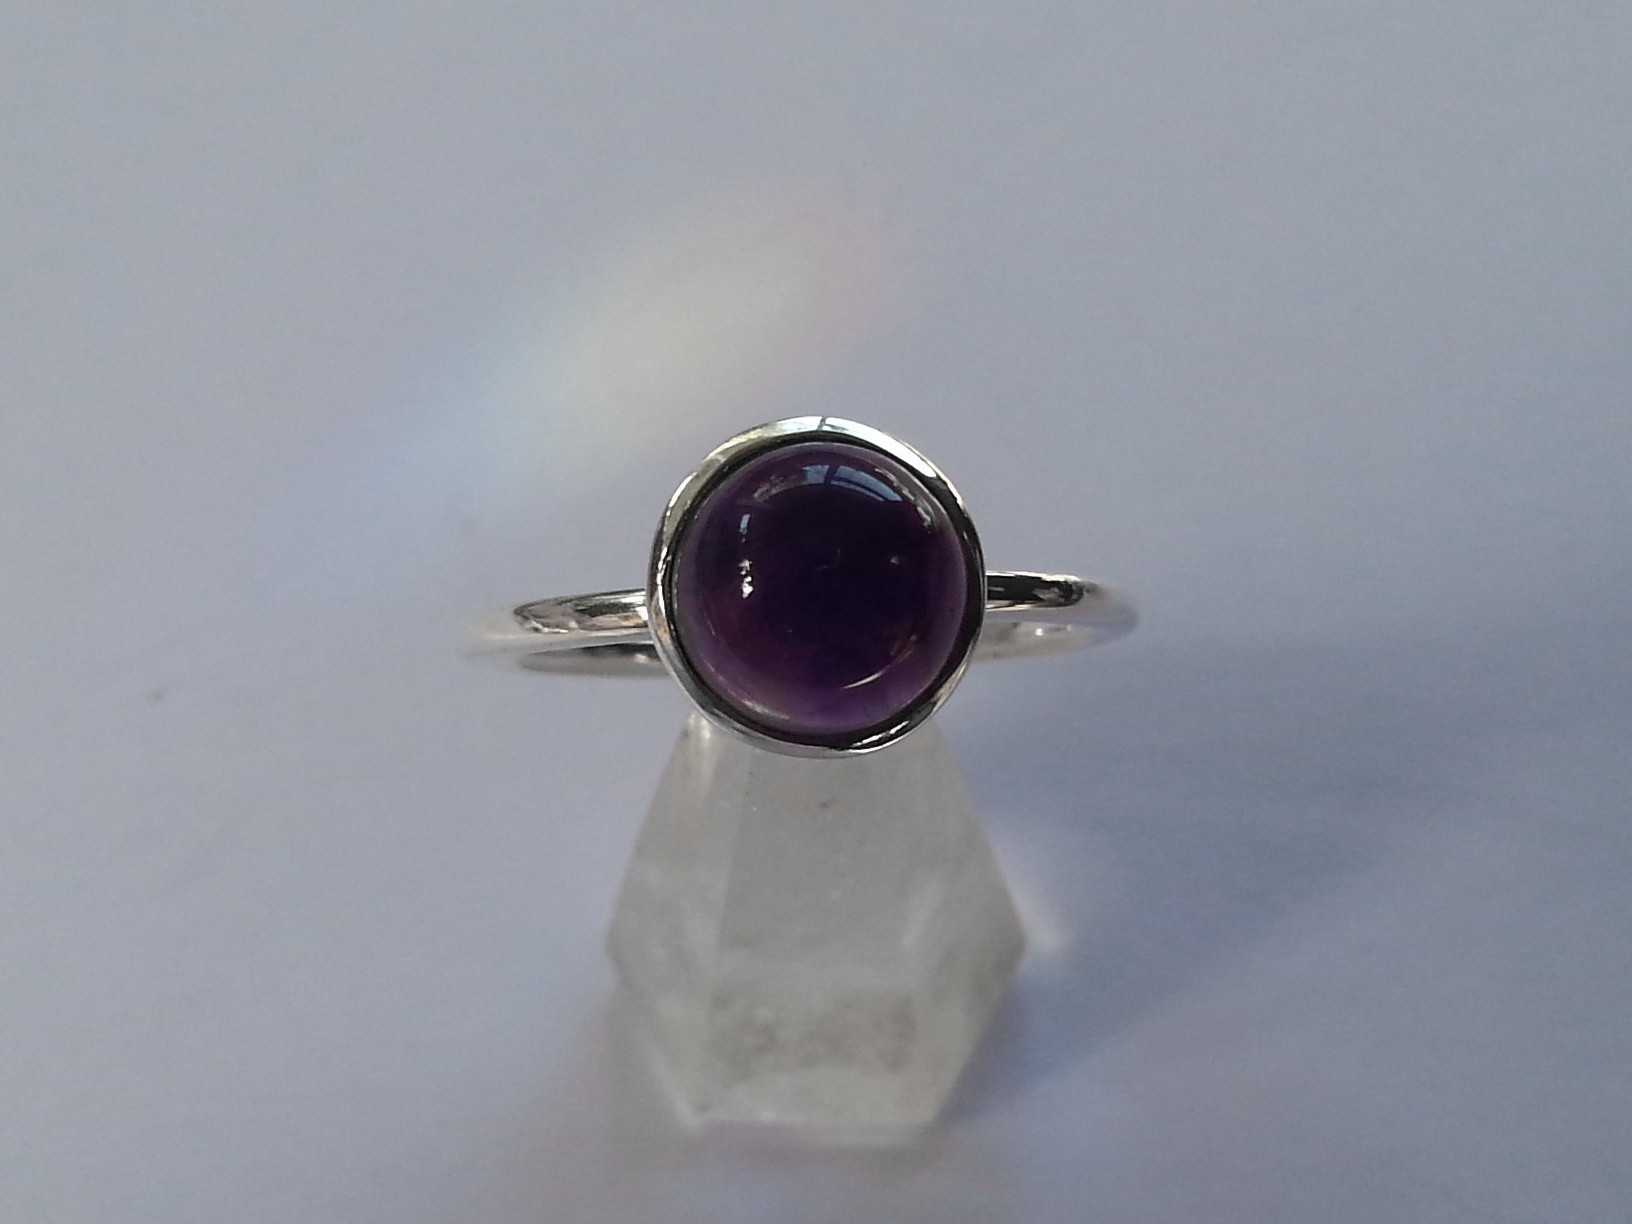 R615 beautifully crafted 8mm gemstone ring.